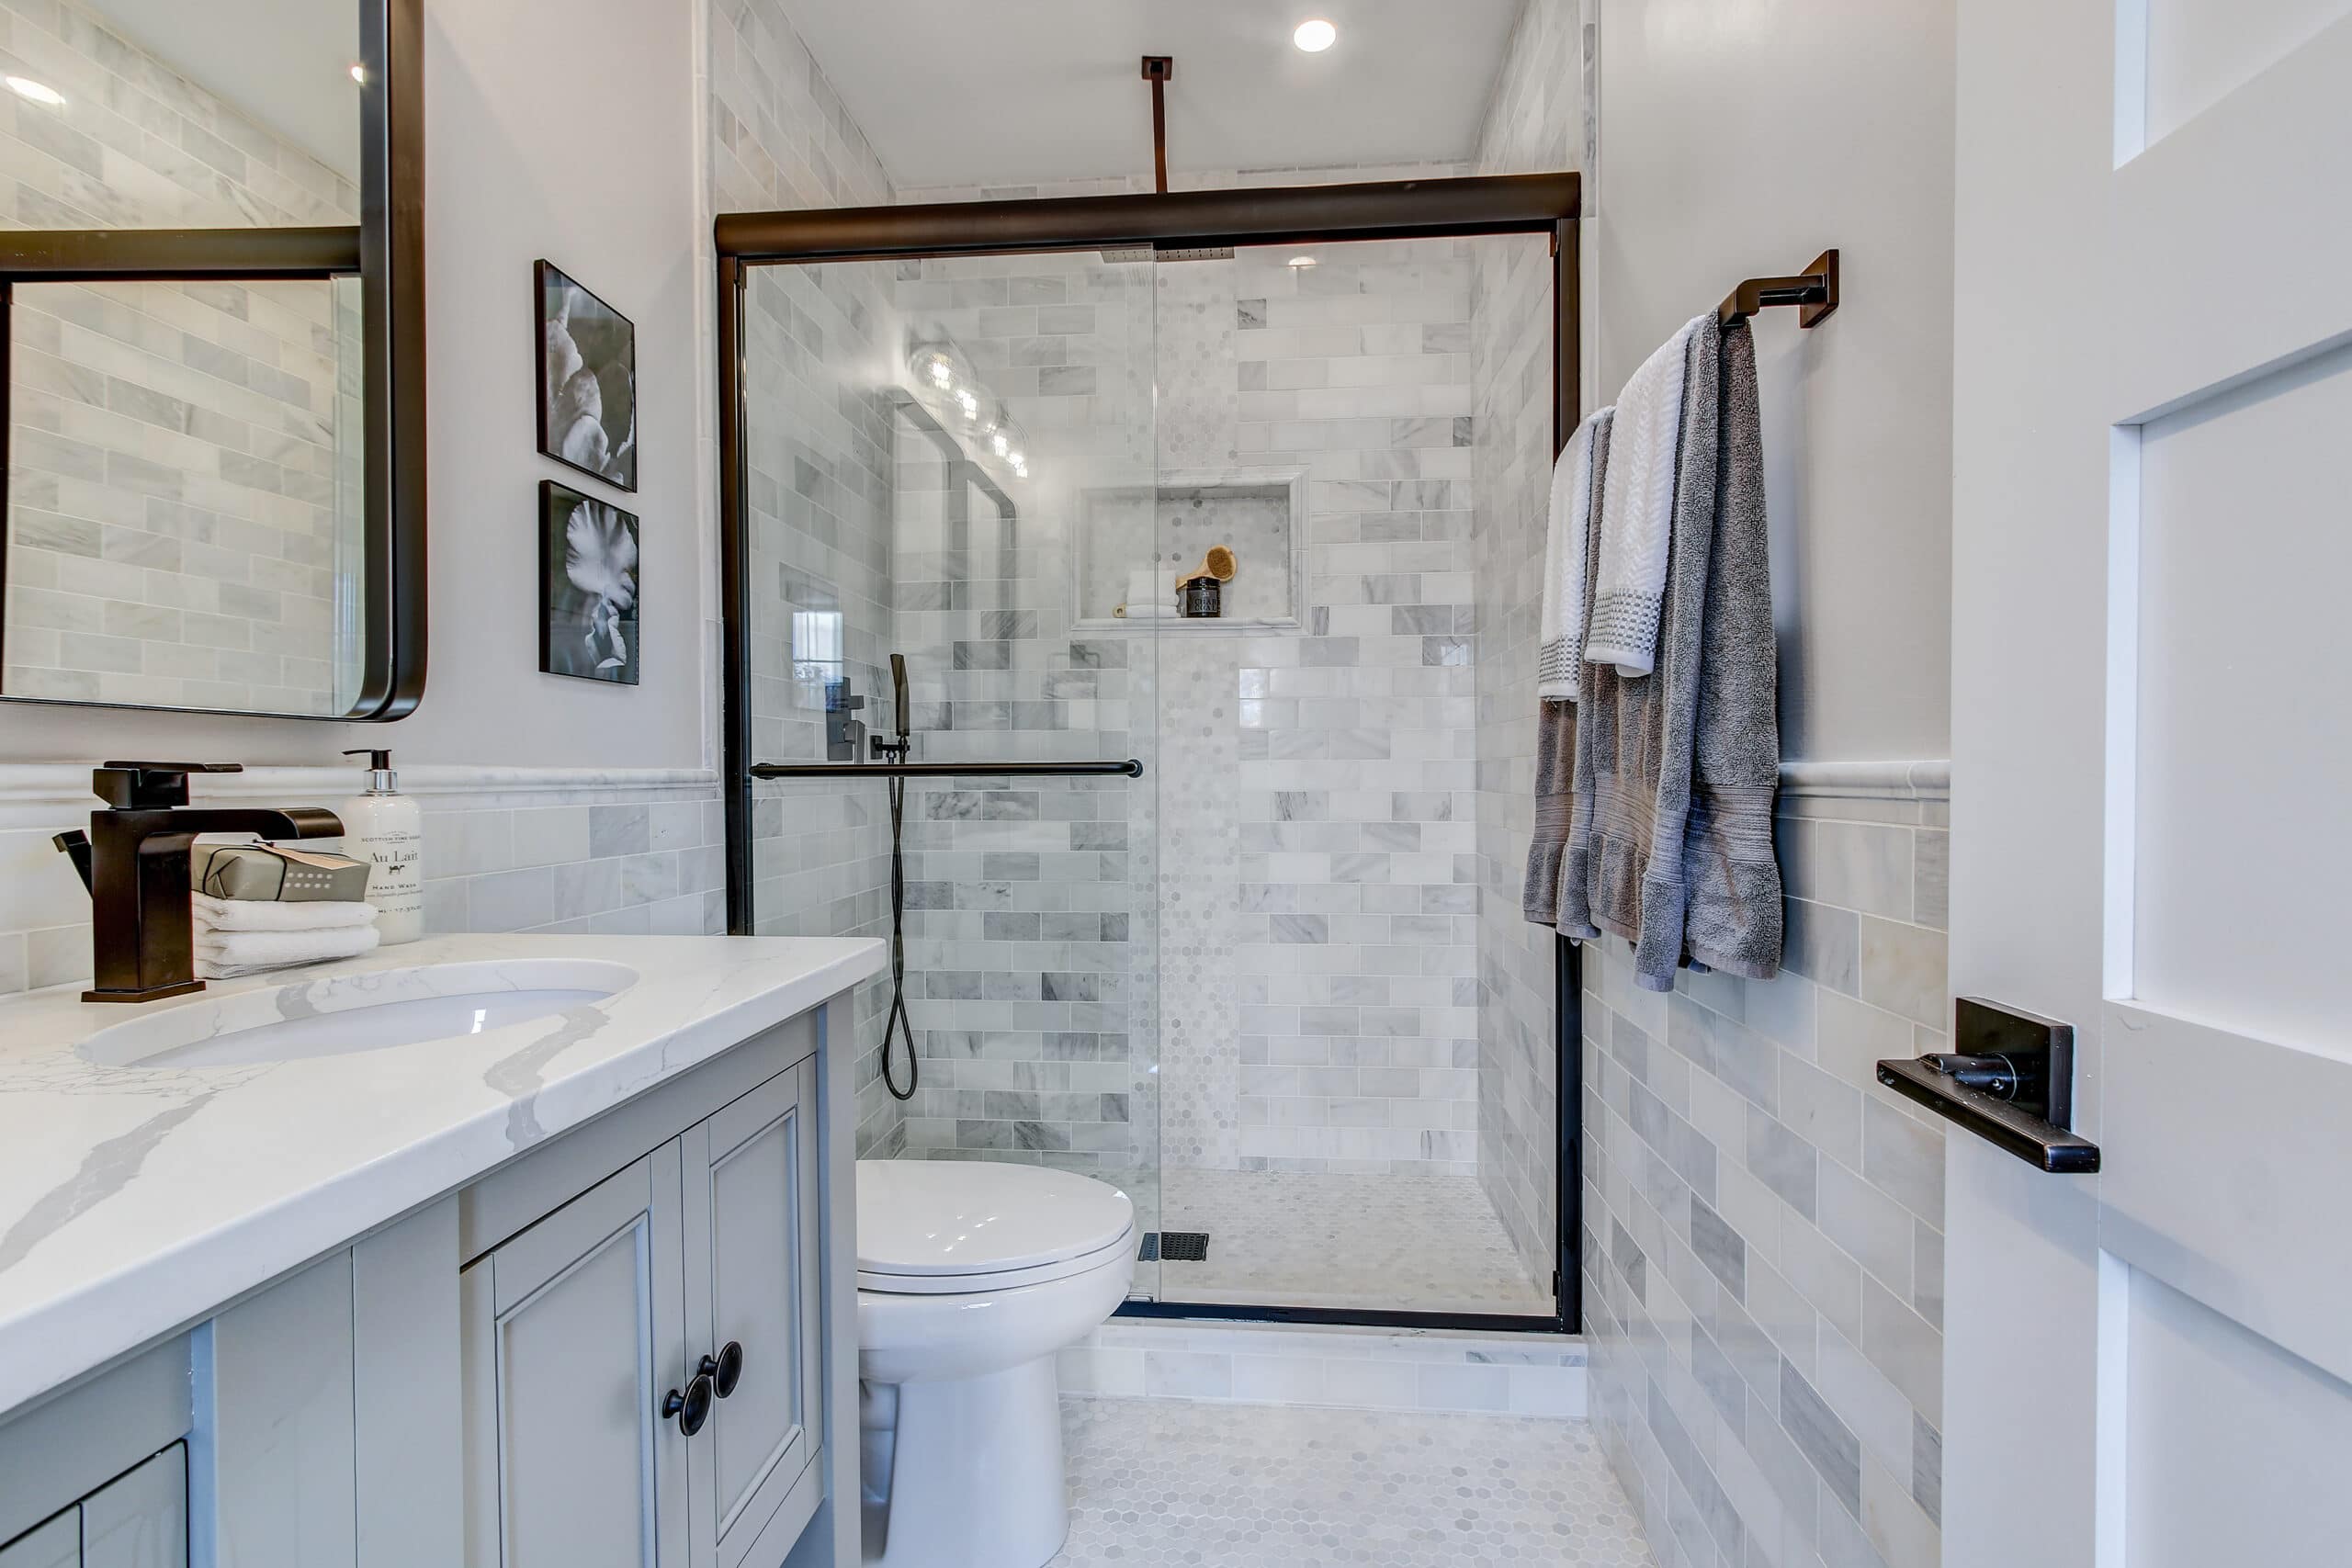 How To Add A Basement Bathroom And Do, Basement Bathroom Remodel